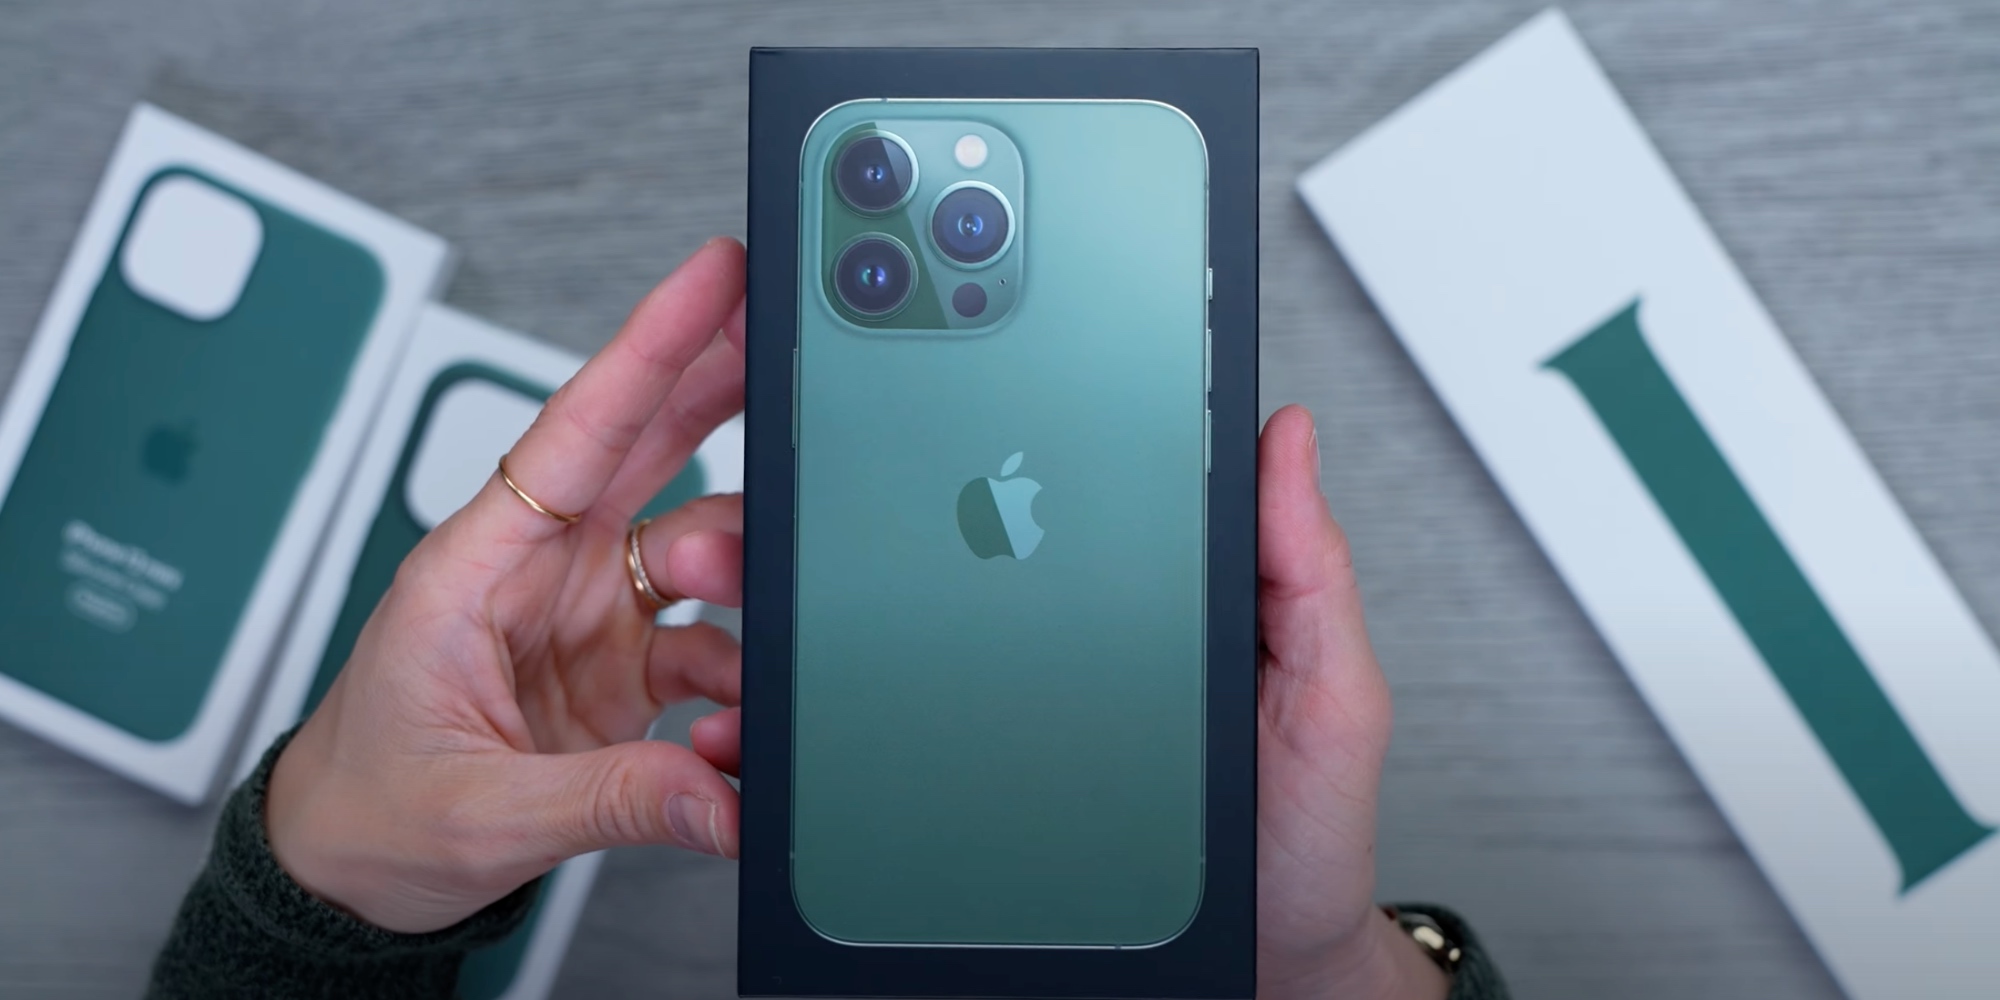 Roundup: Here's a closer look at the new green iPhone 13 and iPhone 13 Pro  designs - 9to5Mac